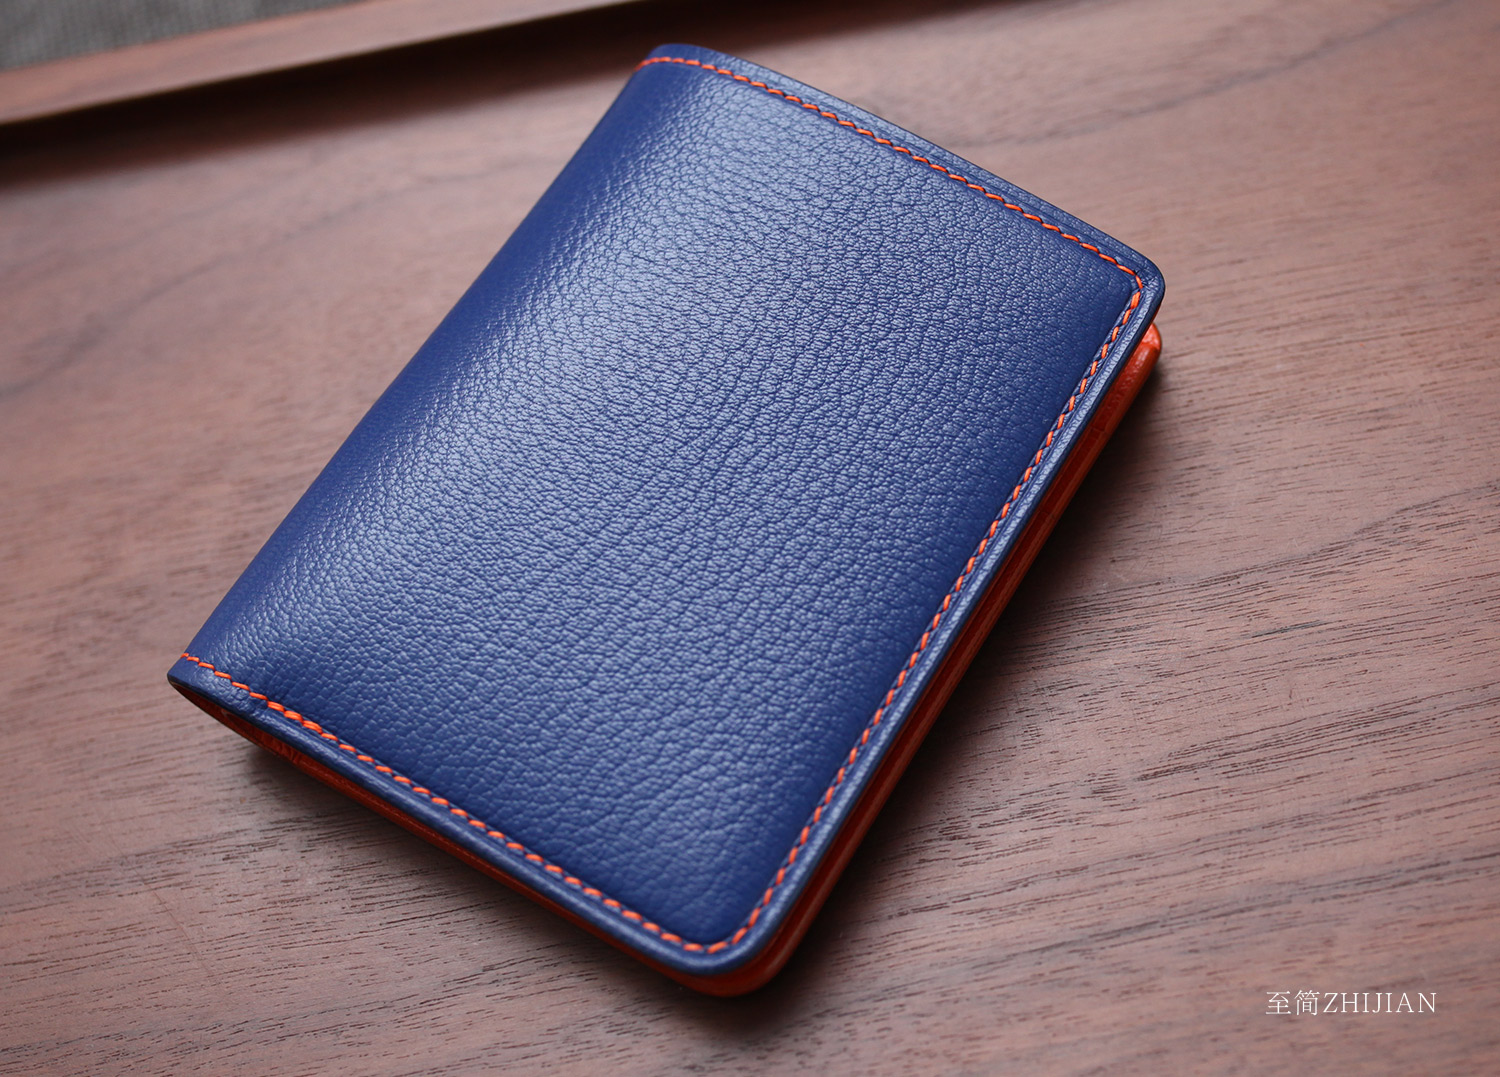 Alran Sully Goat Leather Credit card wallet, Handmade Leather